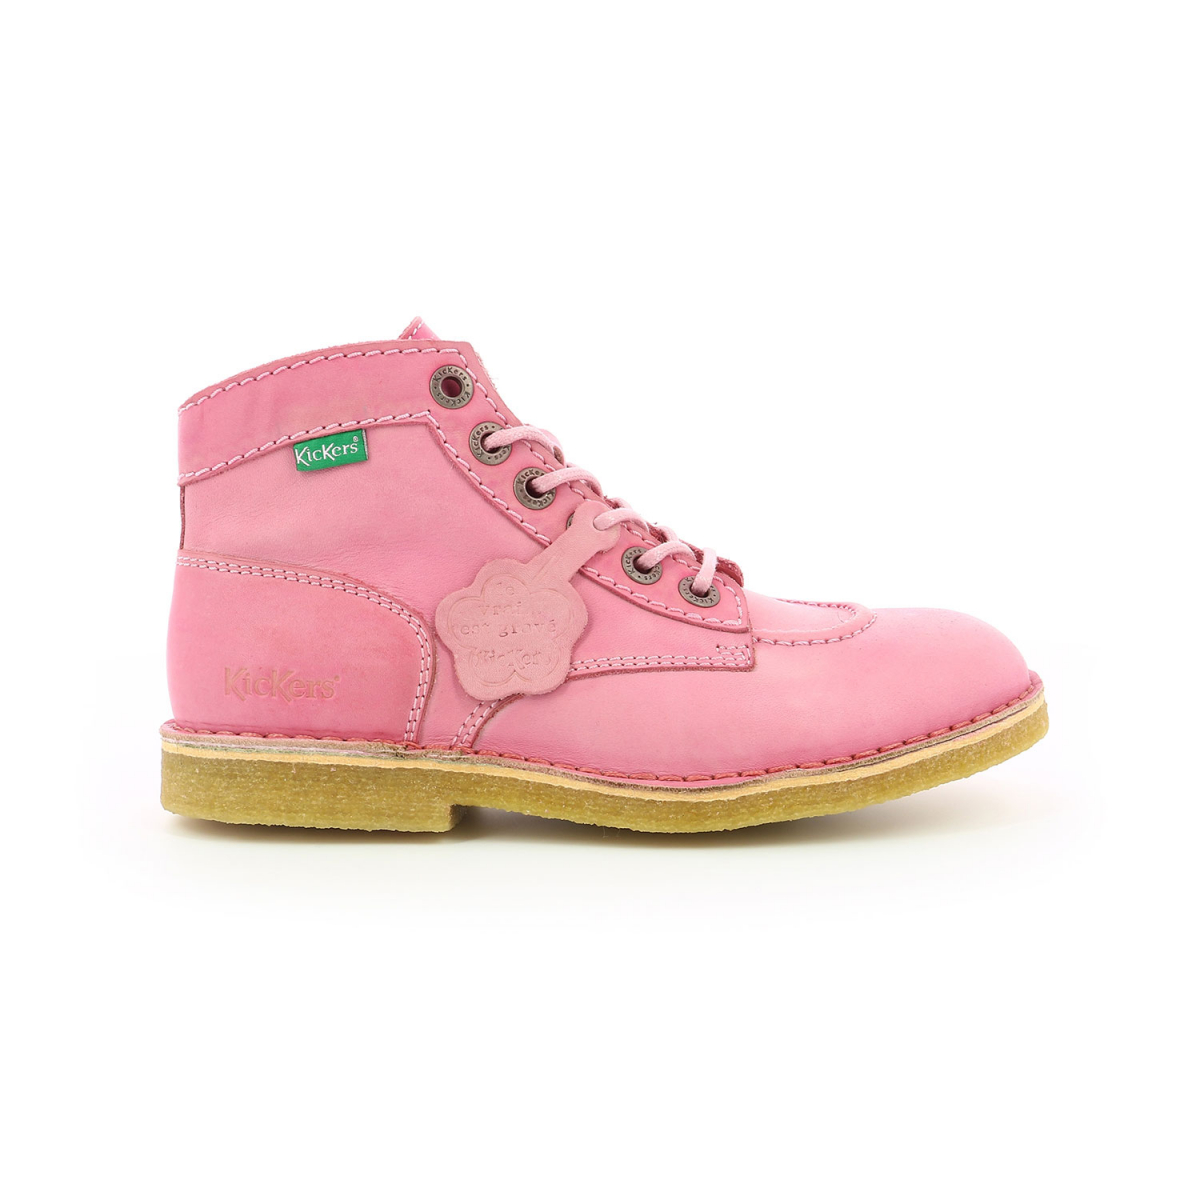 Misery Speak to Carelessness Women's boots Kick Legend pink - shoes for women - Kickers © Official